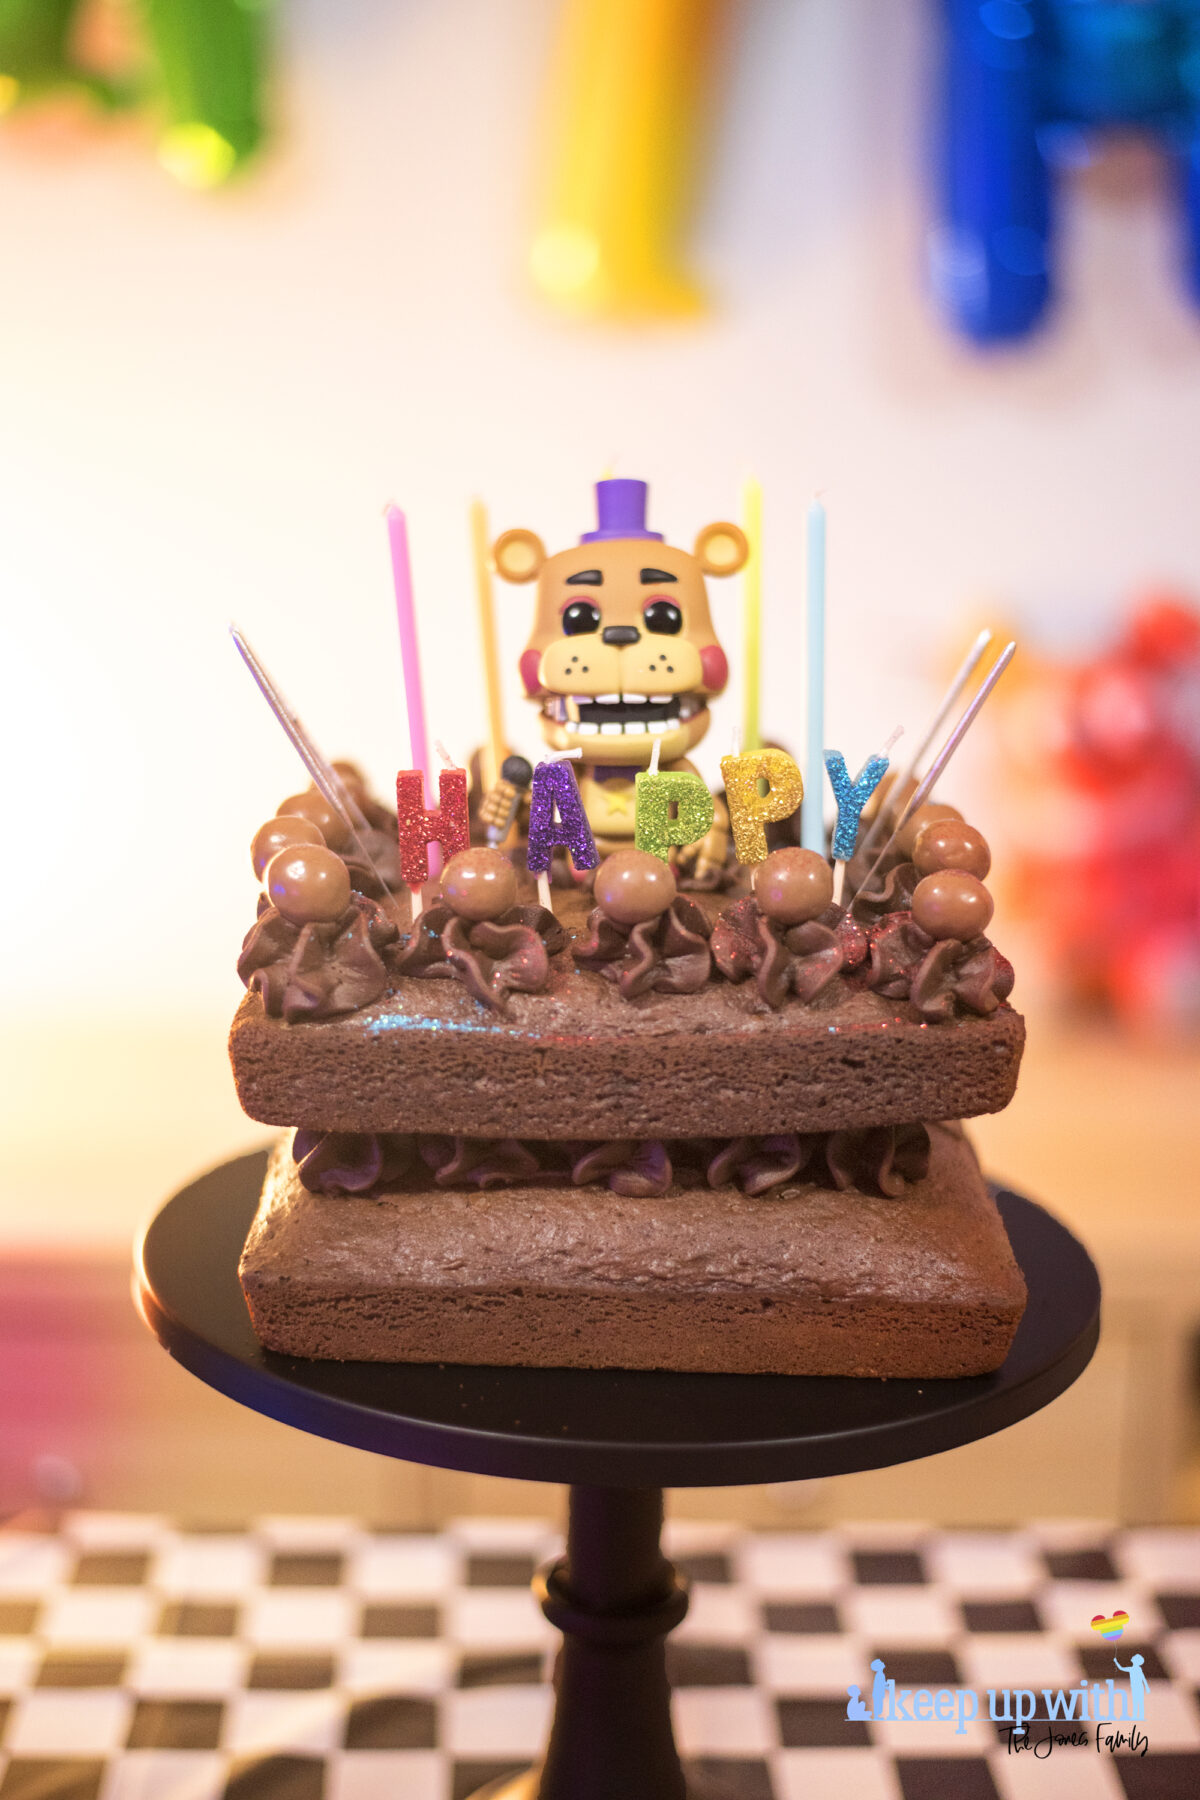 Image shows a homemade square chocolate cake decorated with candles in different colours saying "happy:. There are chocolate icing swirls set with maltesers on top and there are sparklers ready to be lit sticking out of the cake.  In the middle of the cake sits a Funko Pop Vinyl sigure of Freddy Fazbear. Image by keep up with the jones family.